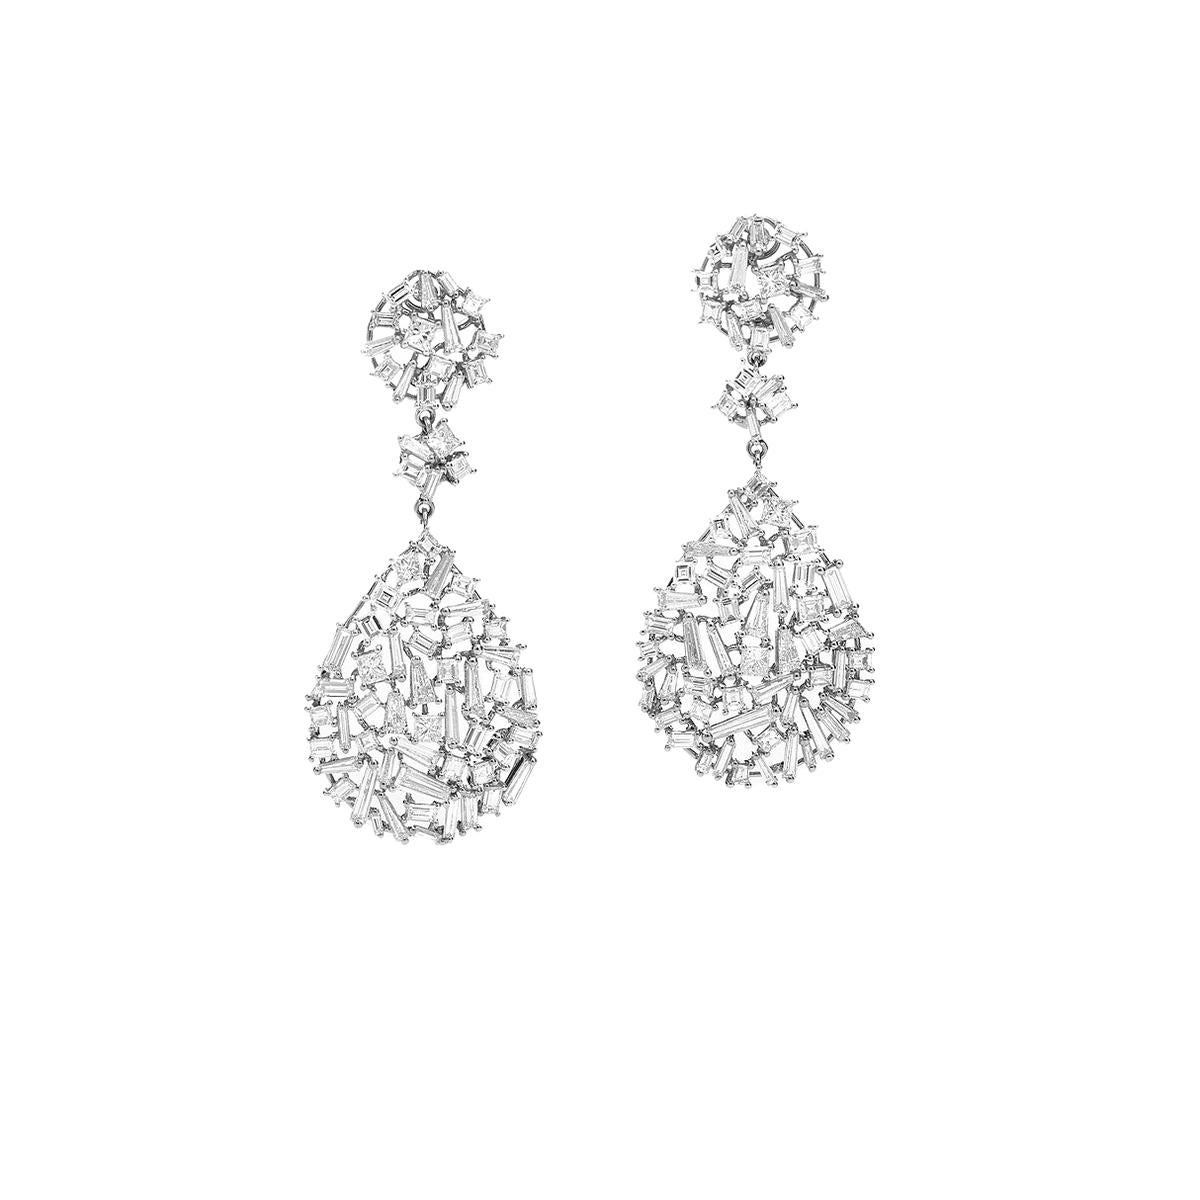 Earrings in 18kt white gold set with 144 baguette, princess, tapers cut diamonds 8.02 cts       